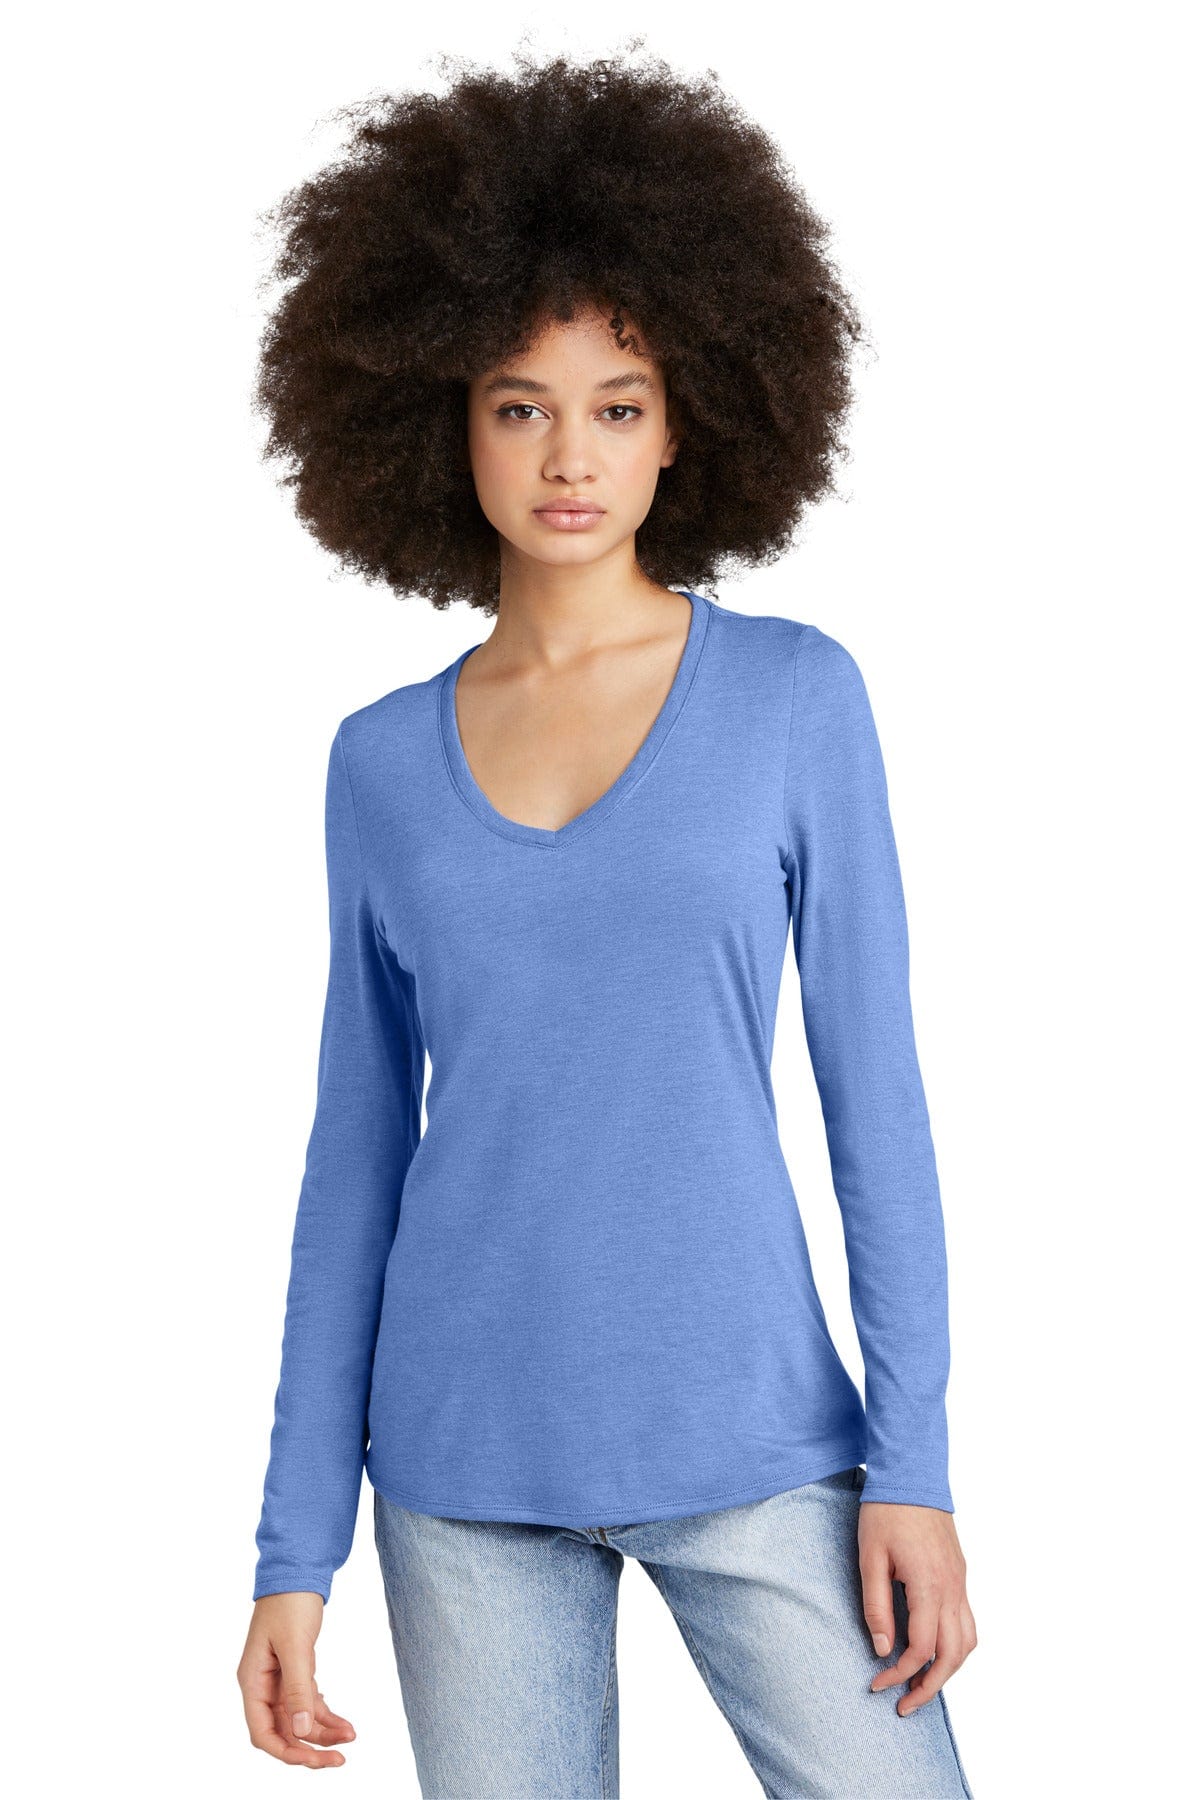 District ® Women's Perfect Tri ® Long Sleeve V-Neck Tee DT135